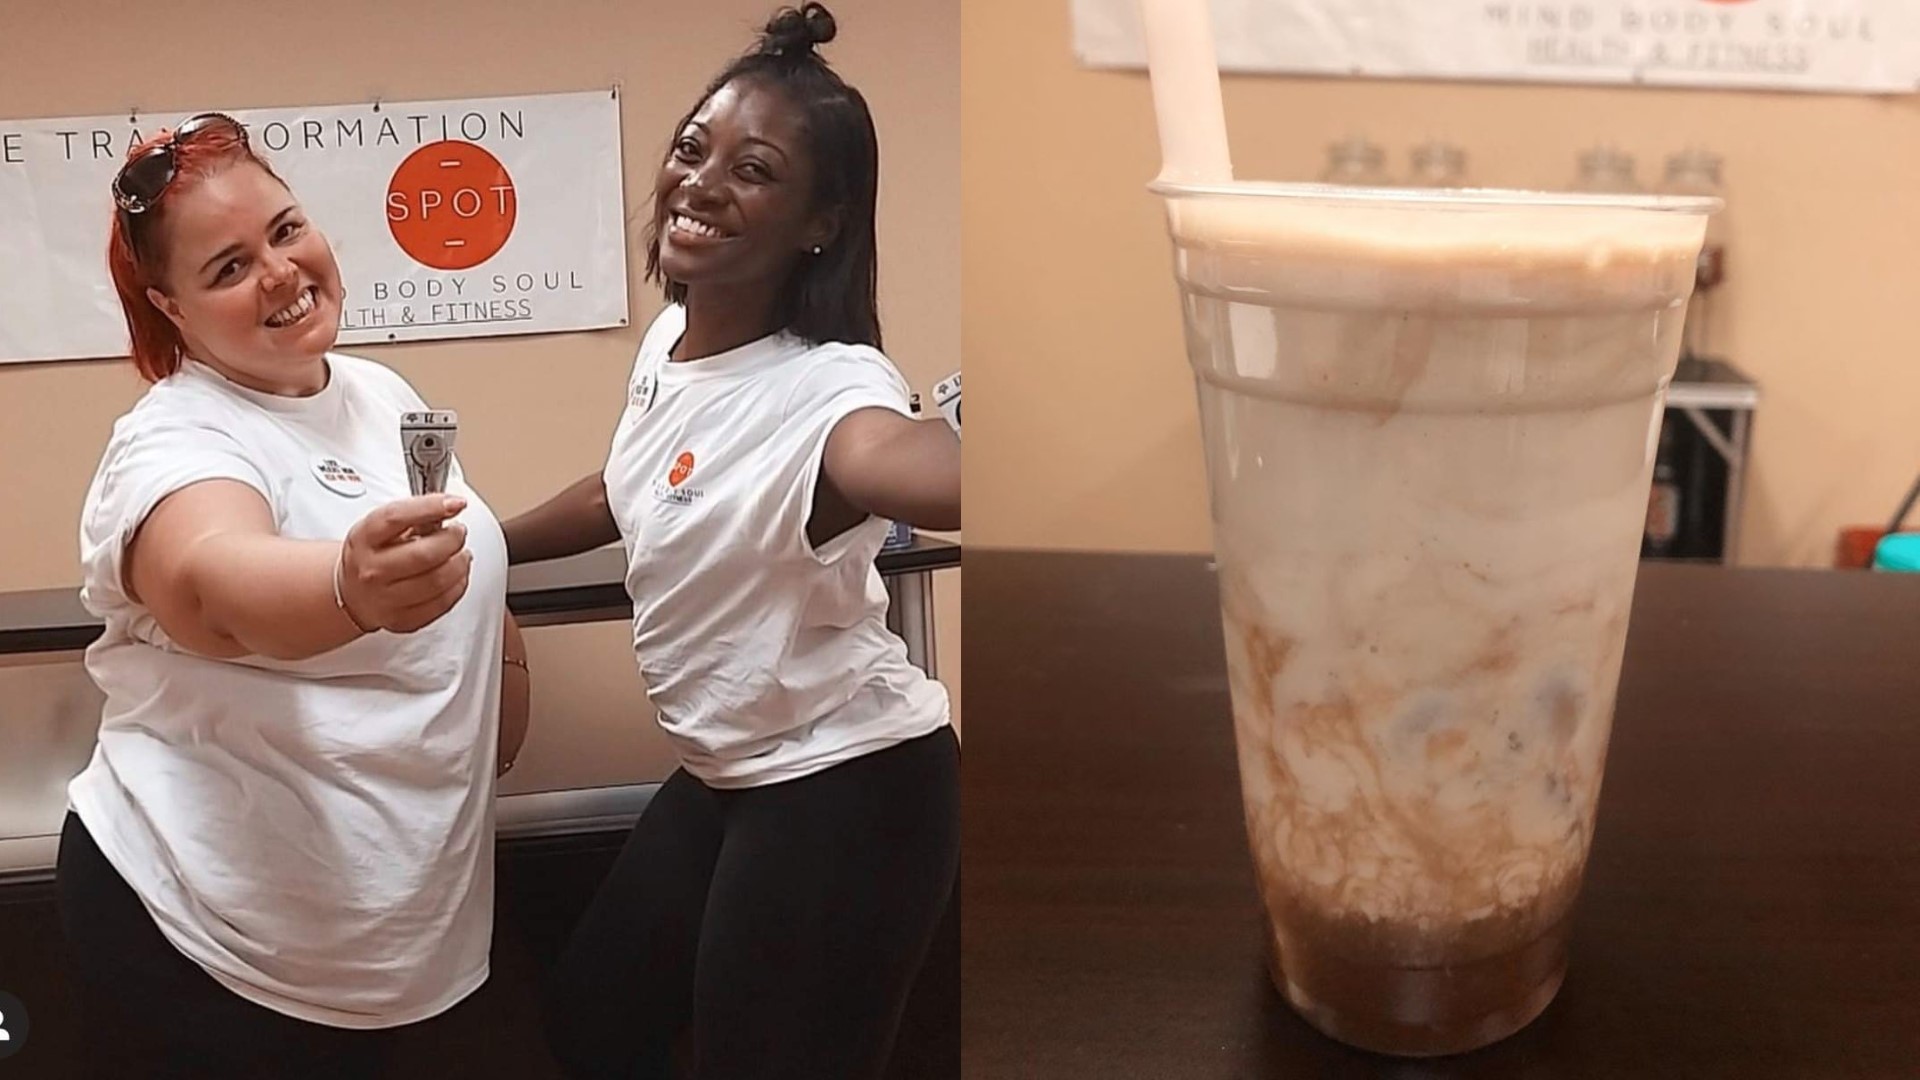 The owners of The Transformation Spot say it is a smoothie and energy tea shop dedicated to providing healthy options for customers